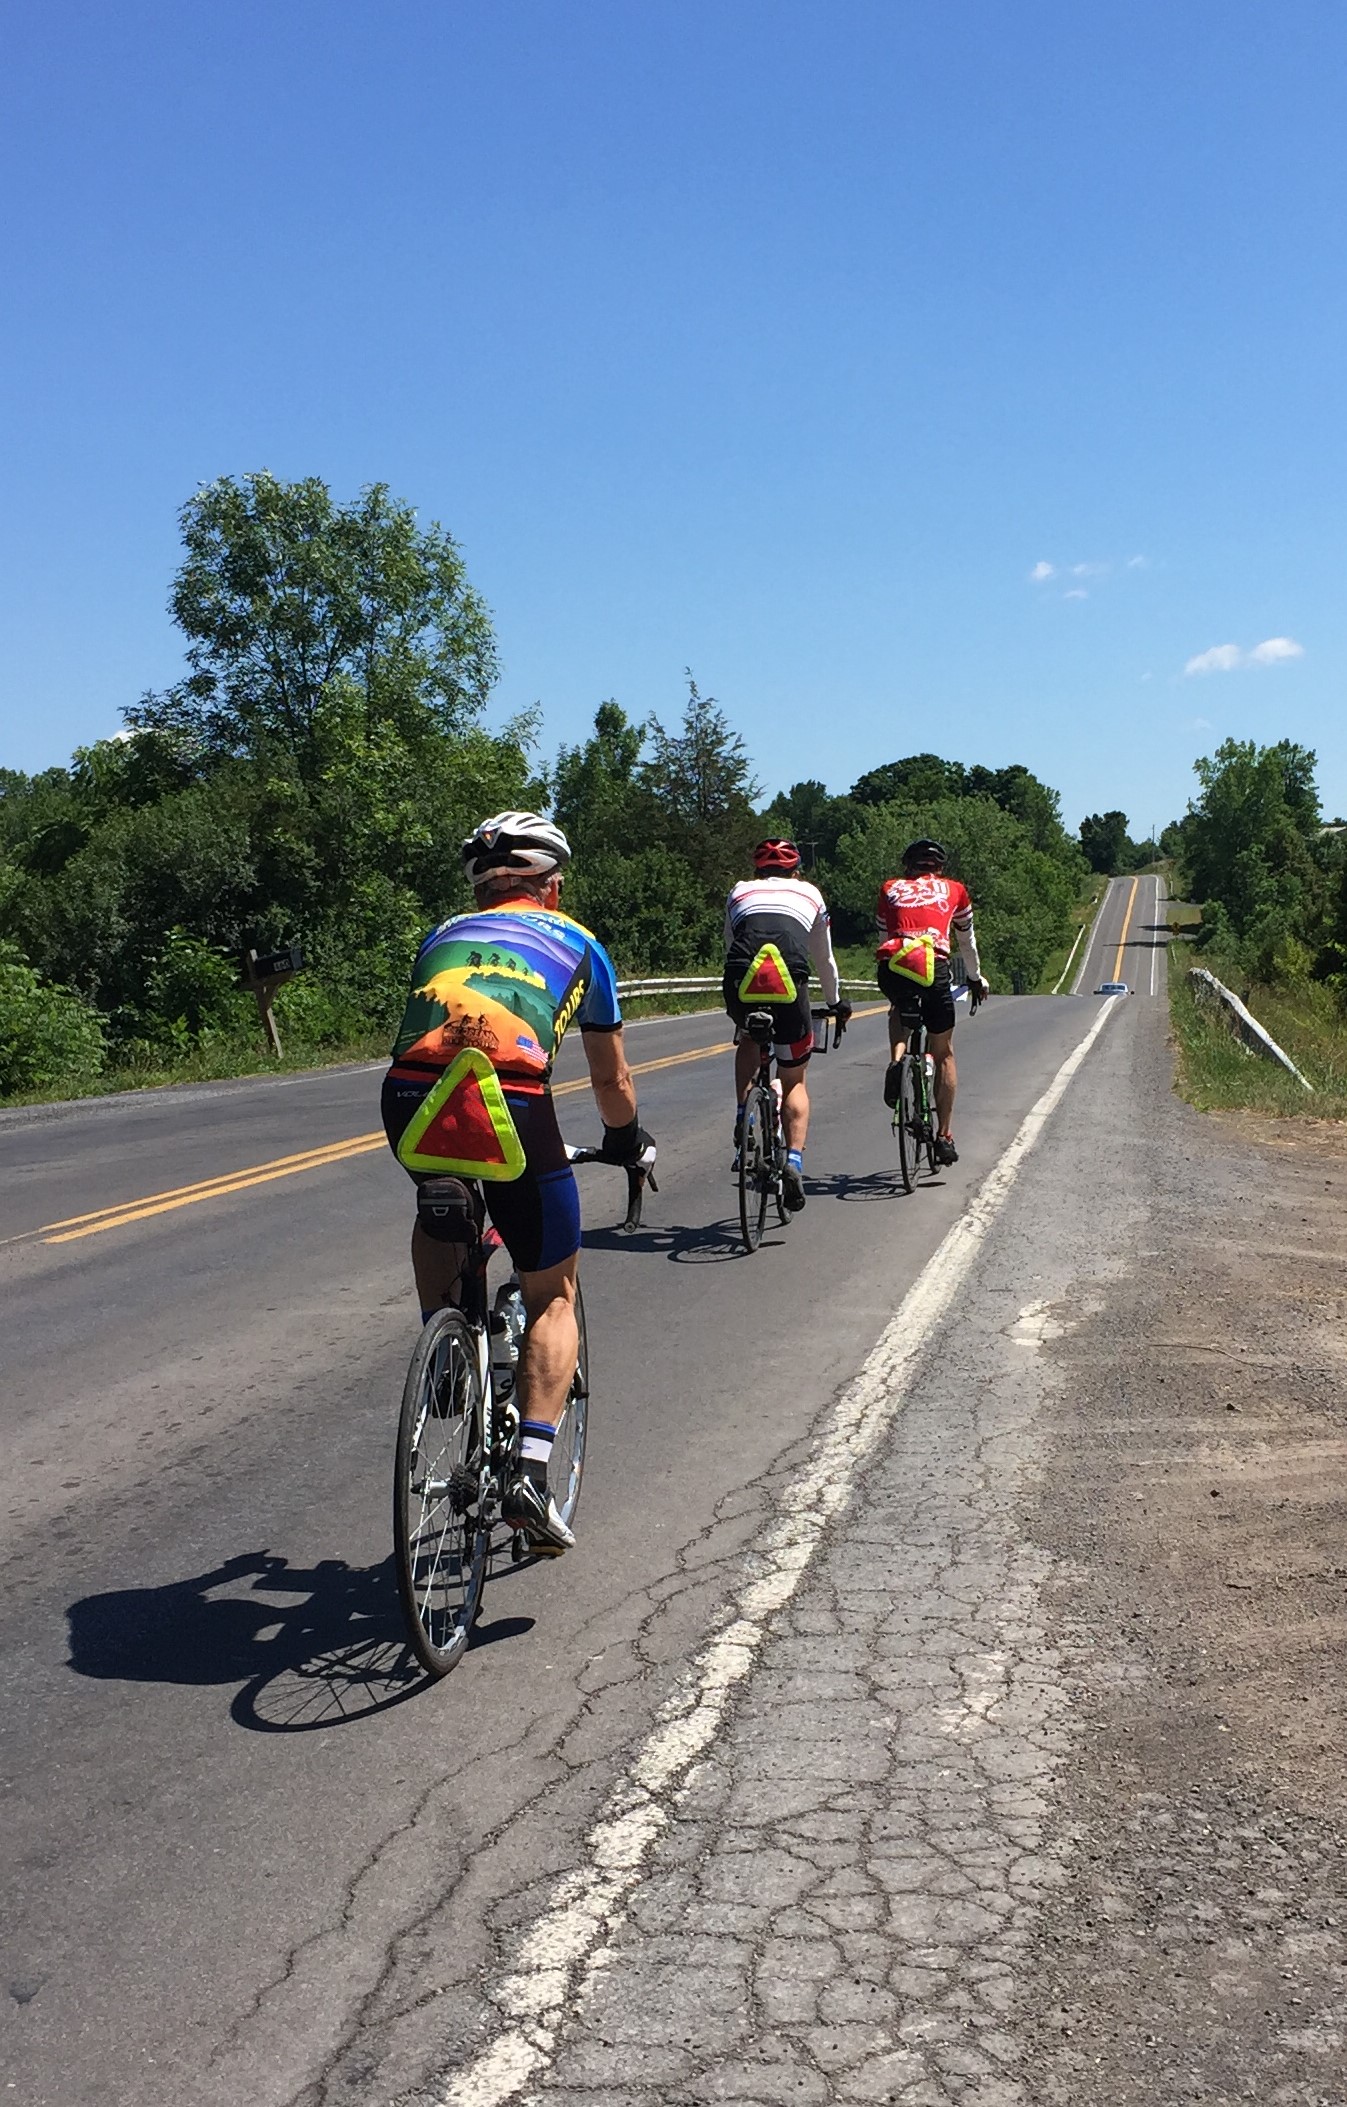 Day 44 – Cross Country Bike Tour – Victor to Syracuse, NY